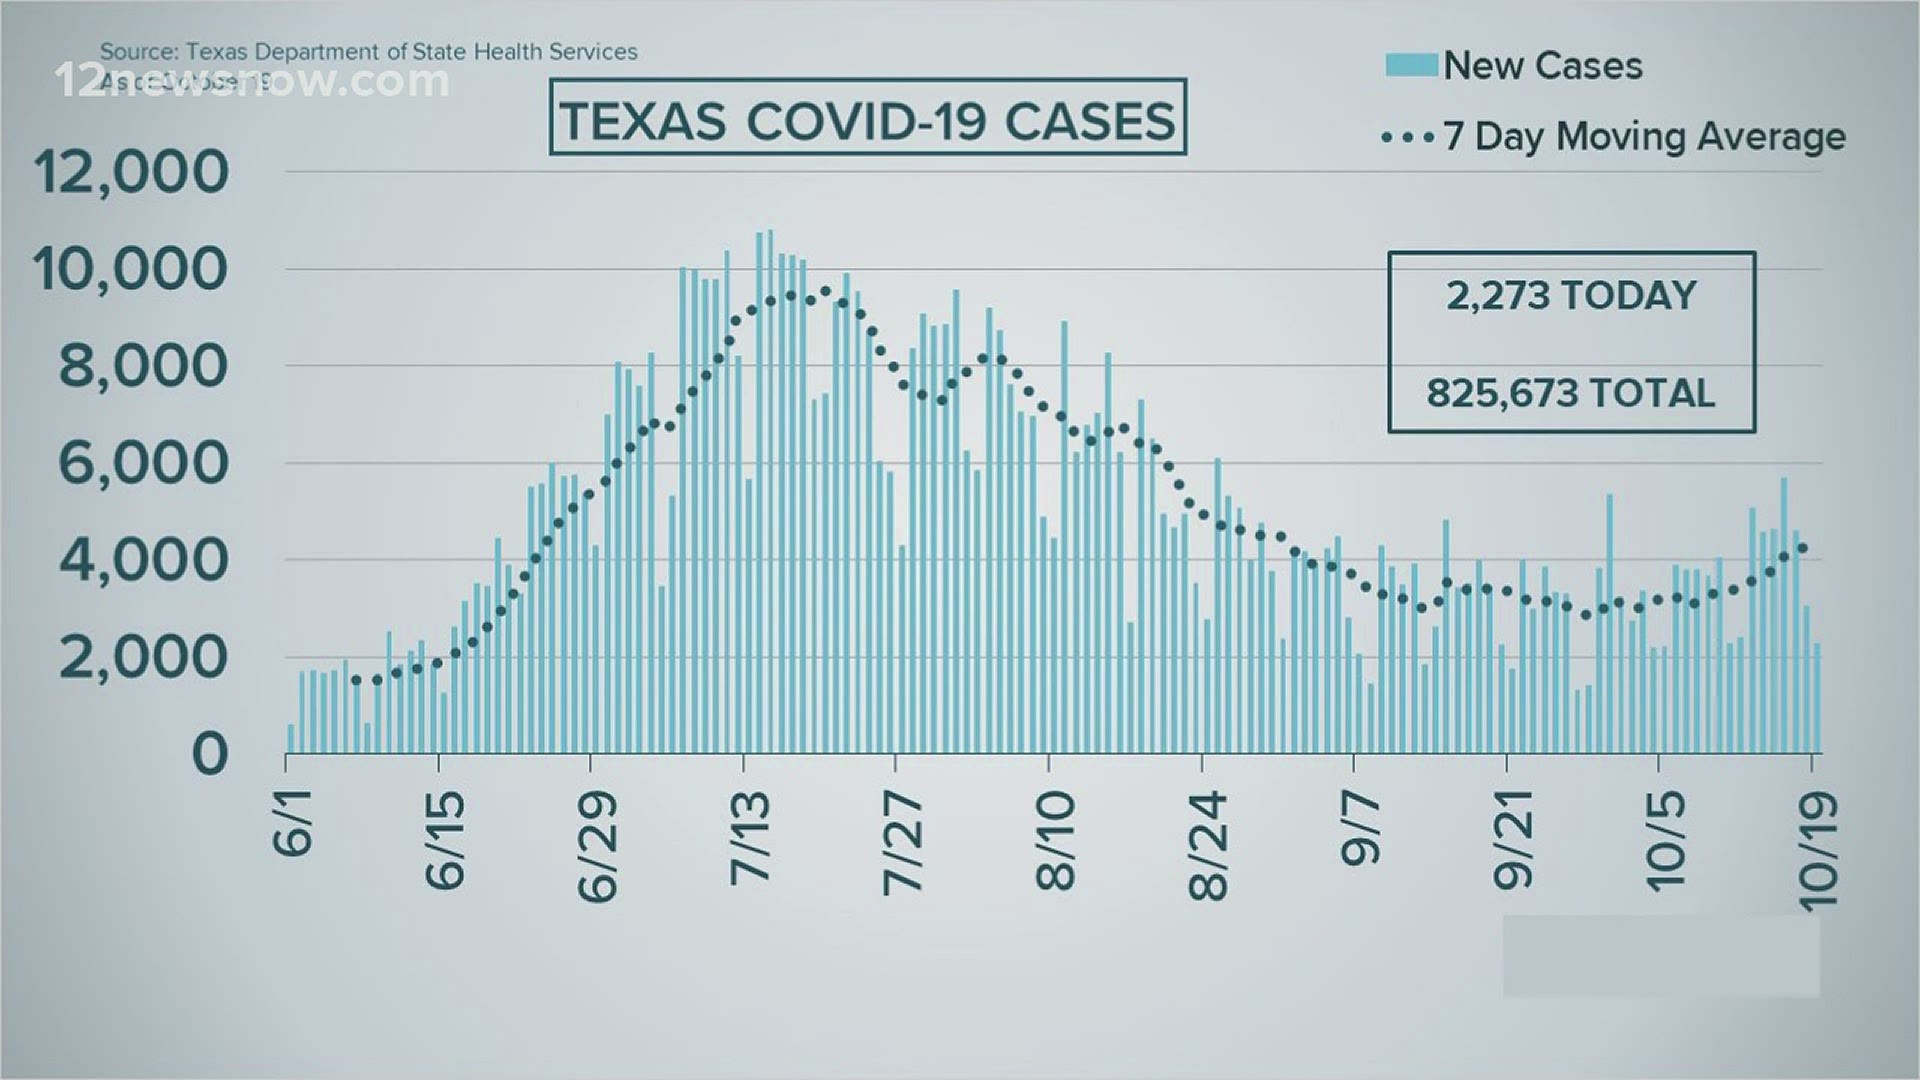 Weekly average of COVID19 cases in Texas increased 25 percent